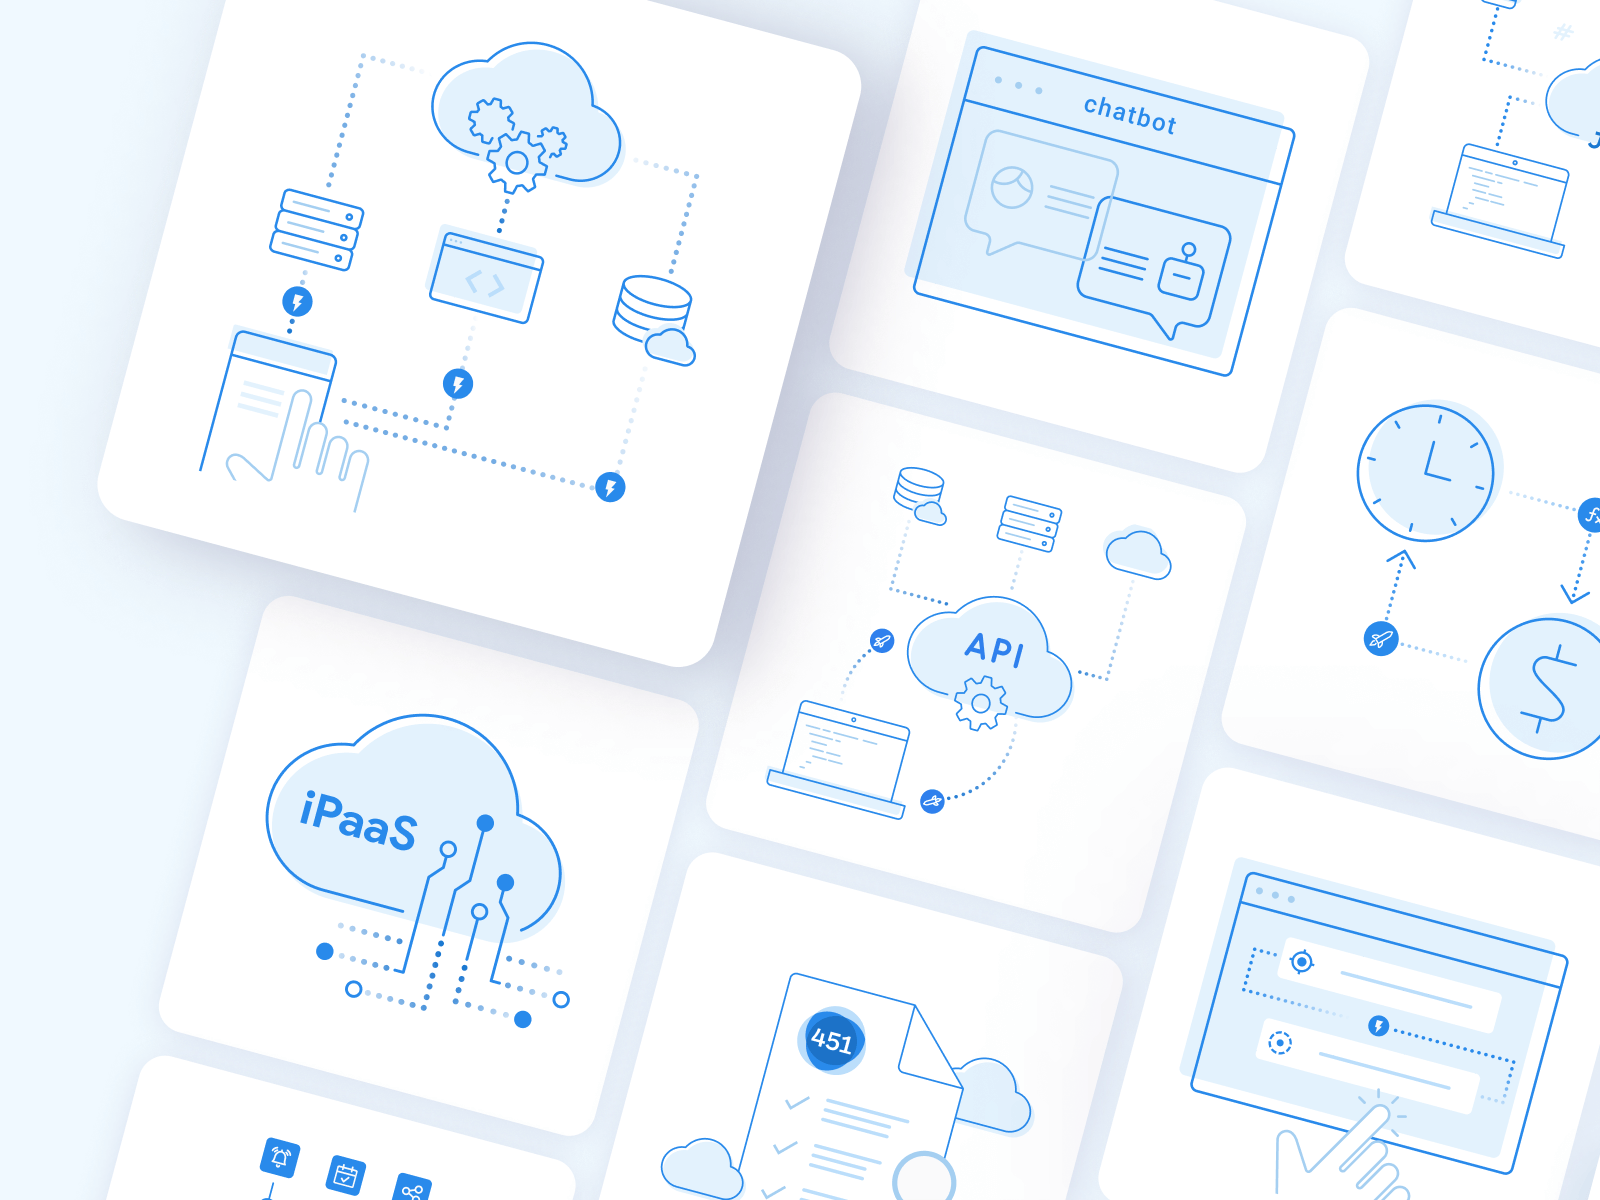 Collection of blue line illustrations representing various cloud computing and integration concepts